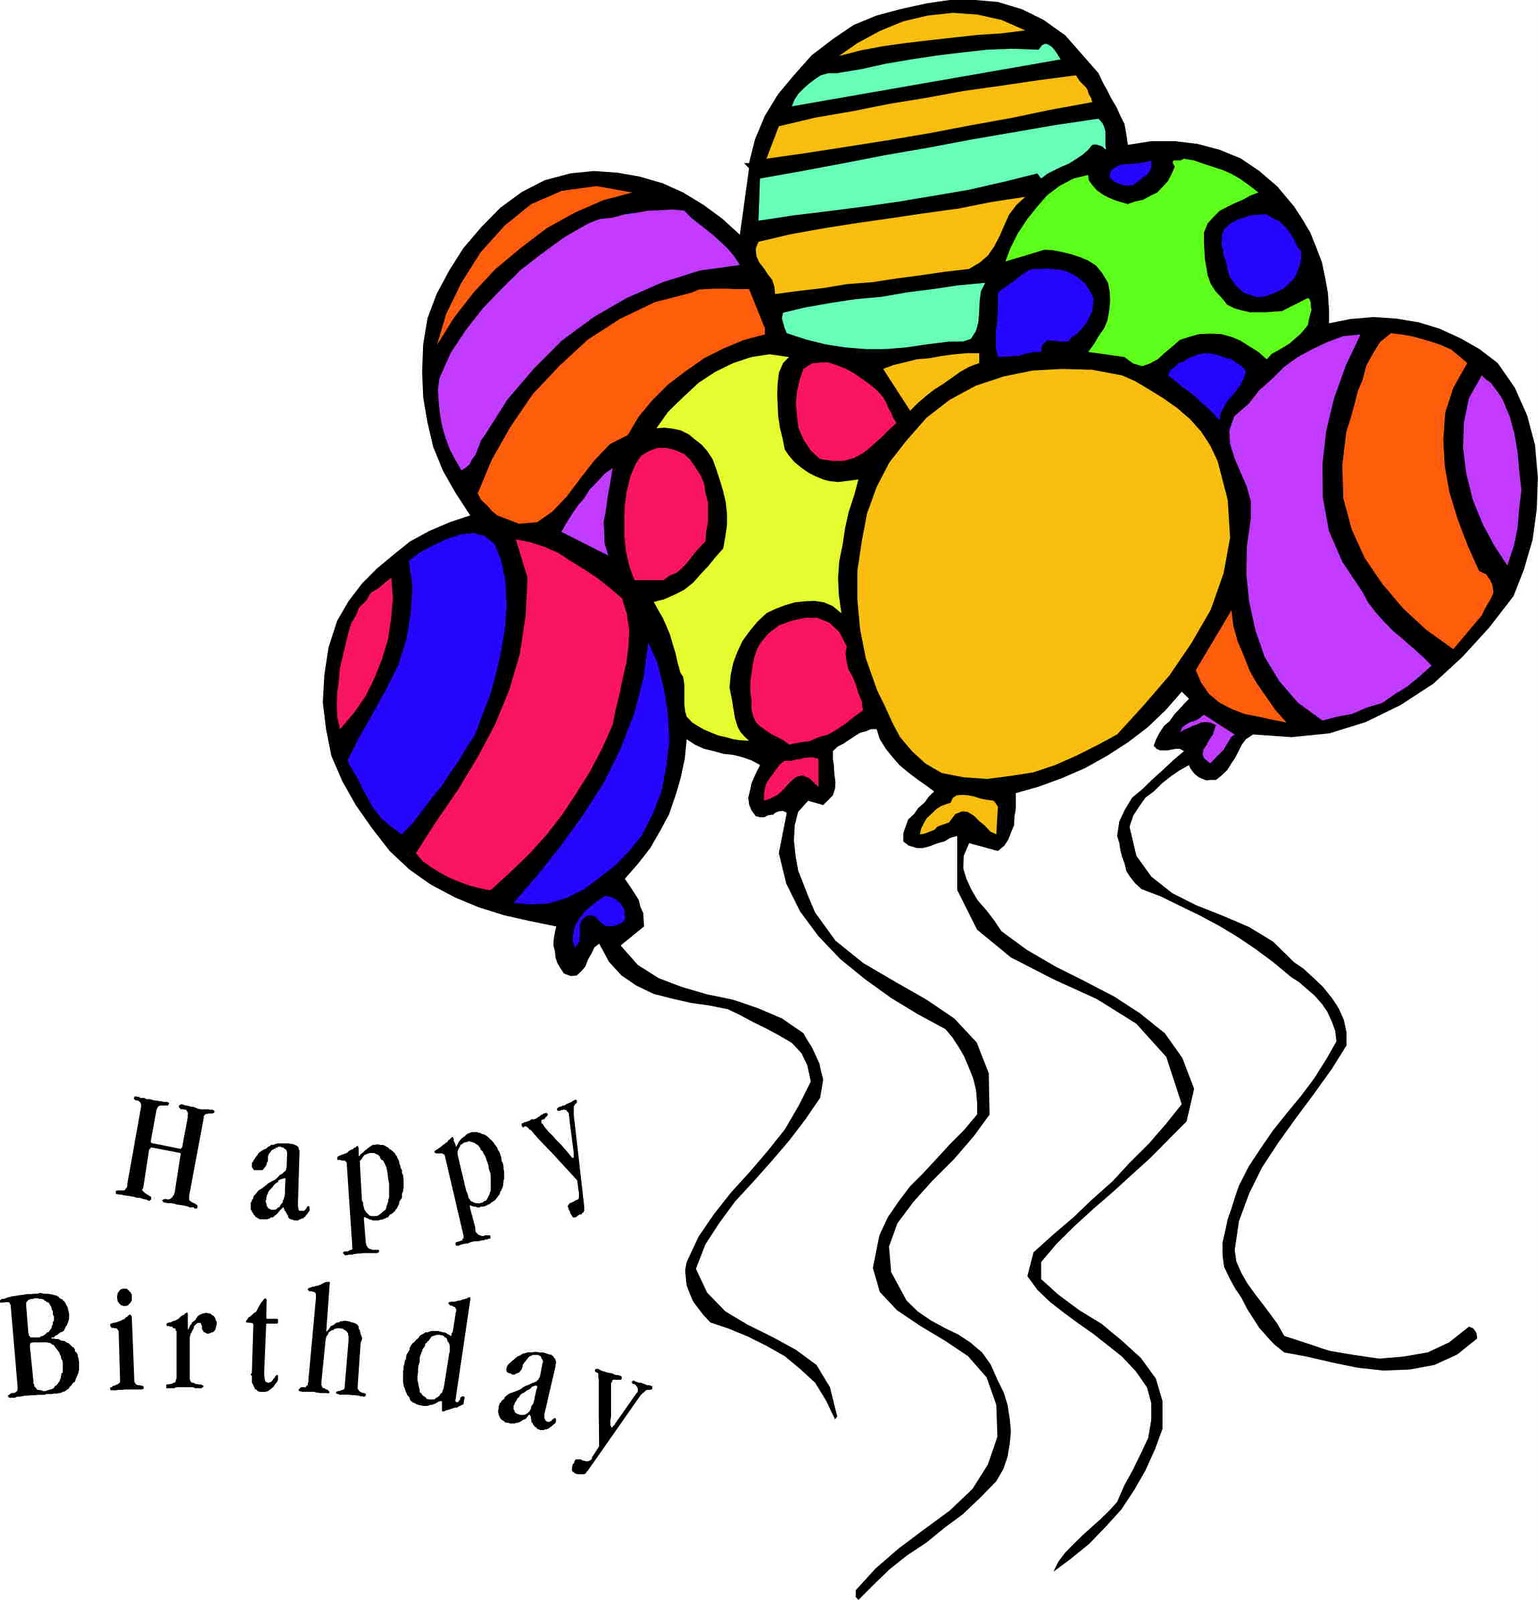 Happy Birthday Balloons Free Download Png Clipart